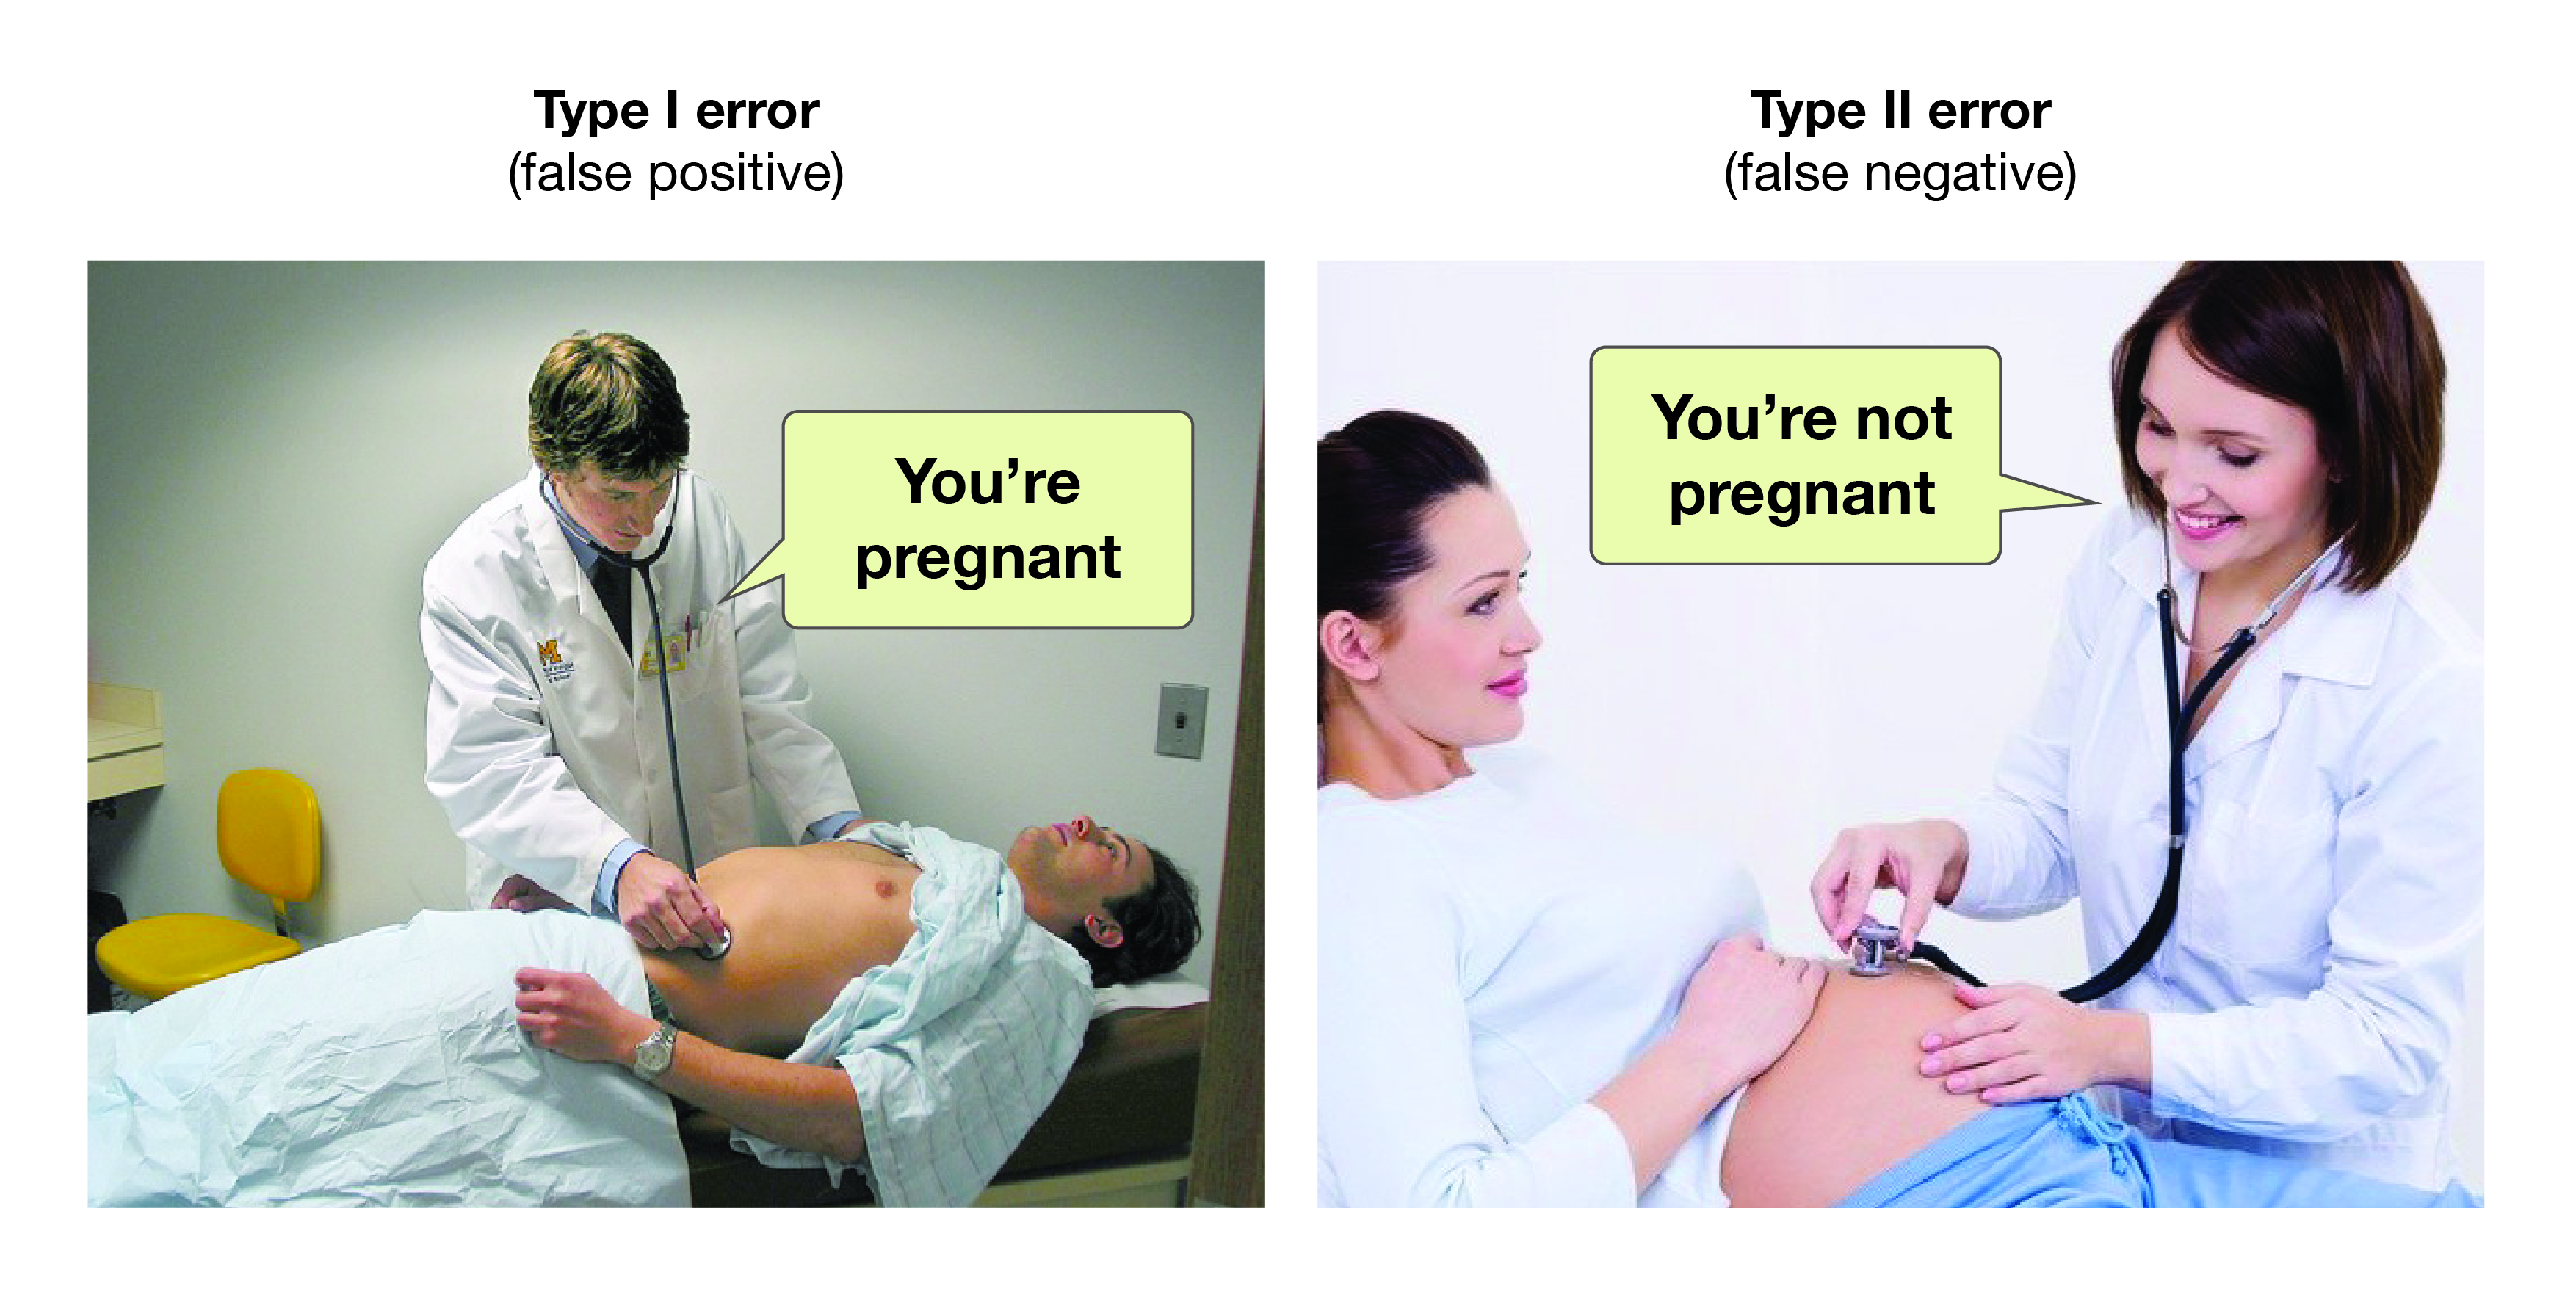 Figure 13.4 A Humorous Example of How Type I and Type II Errors Could Play out in Pregnancy Exams.